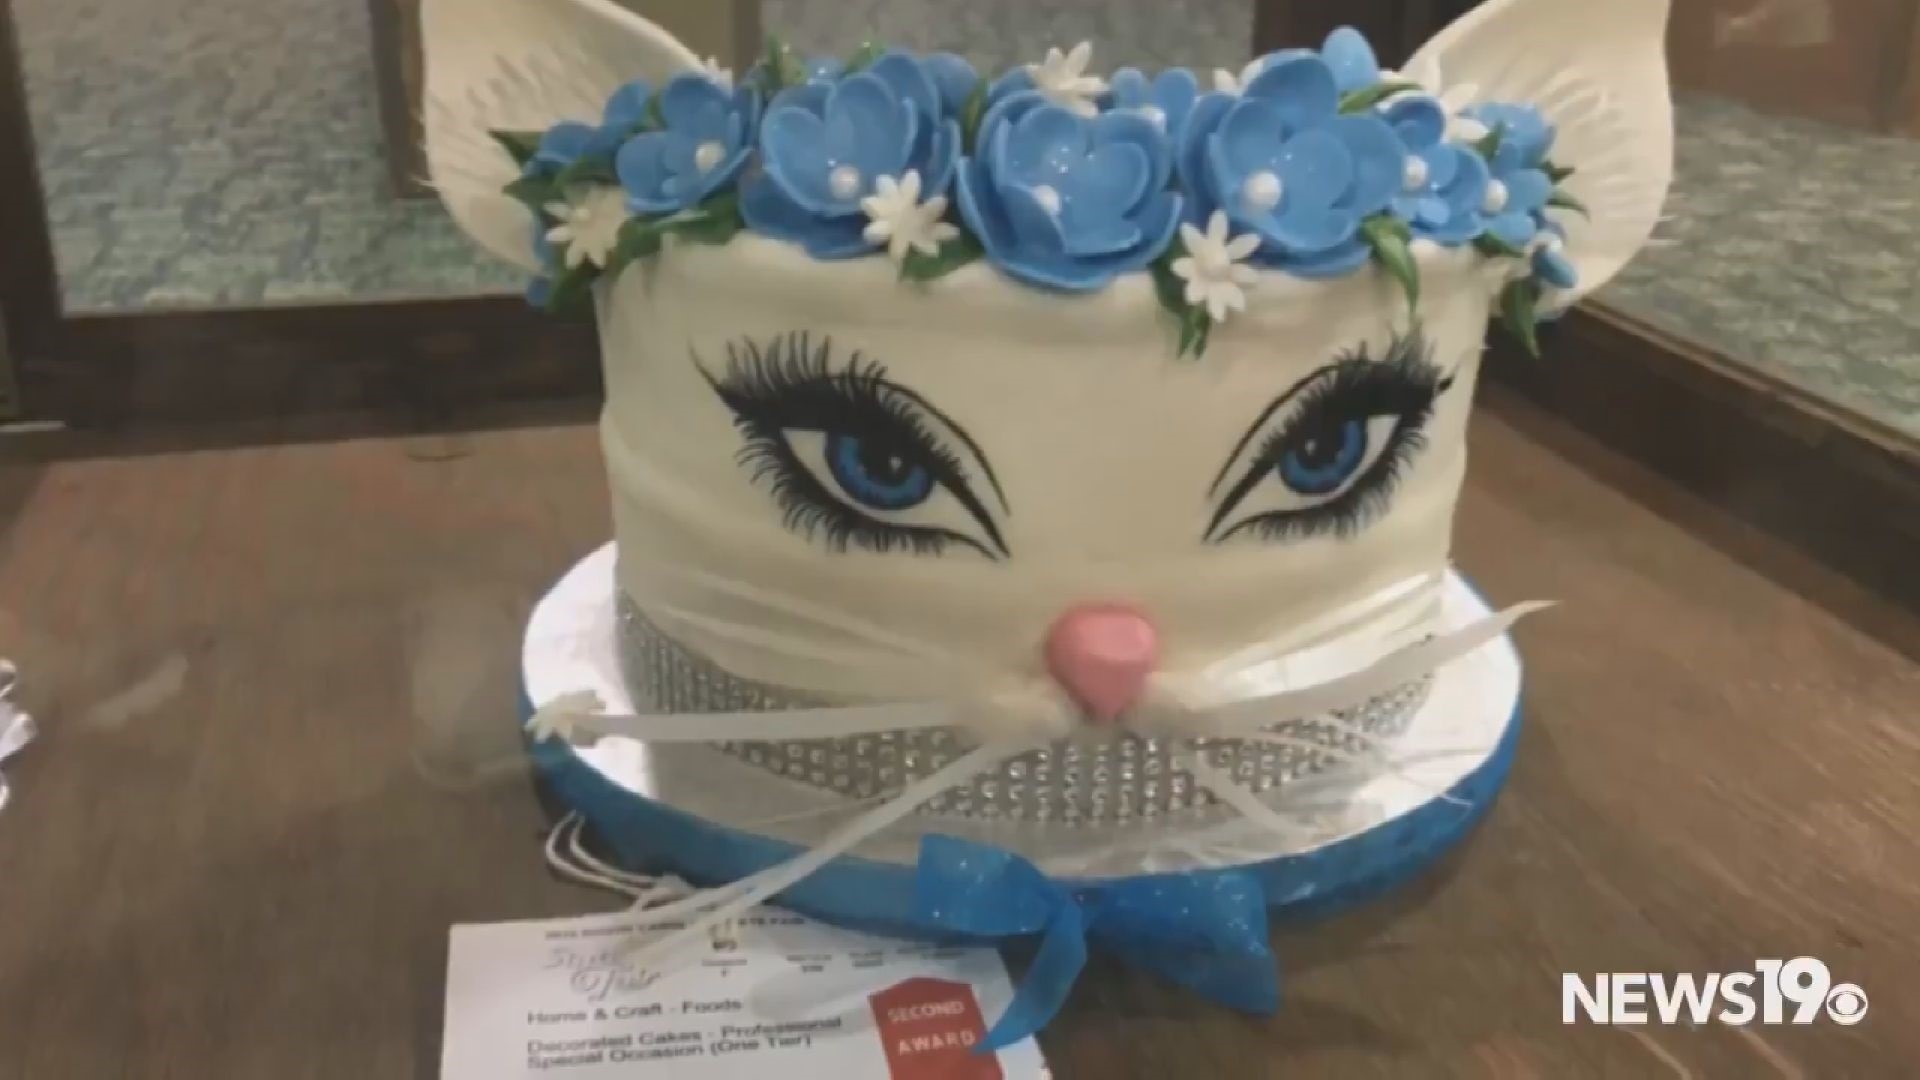 The best confection makers in the region are taking part in the cake competition at the South Carolina State Fair.